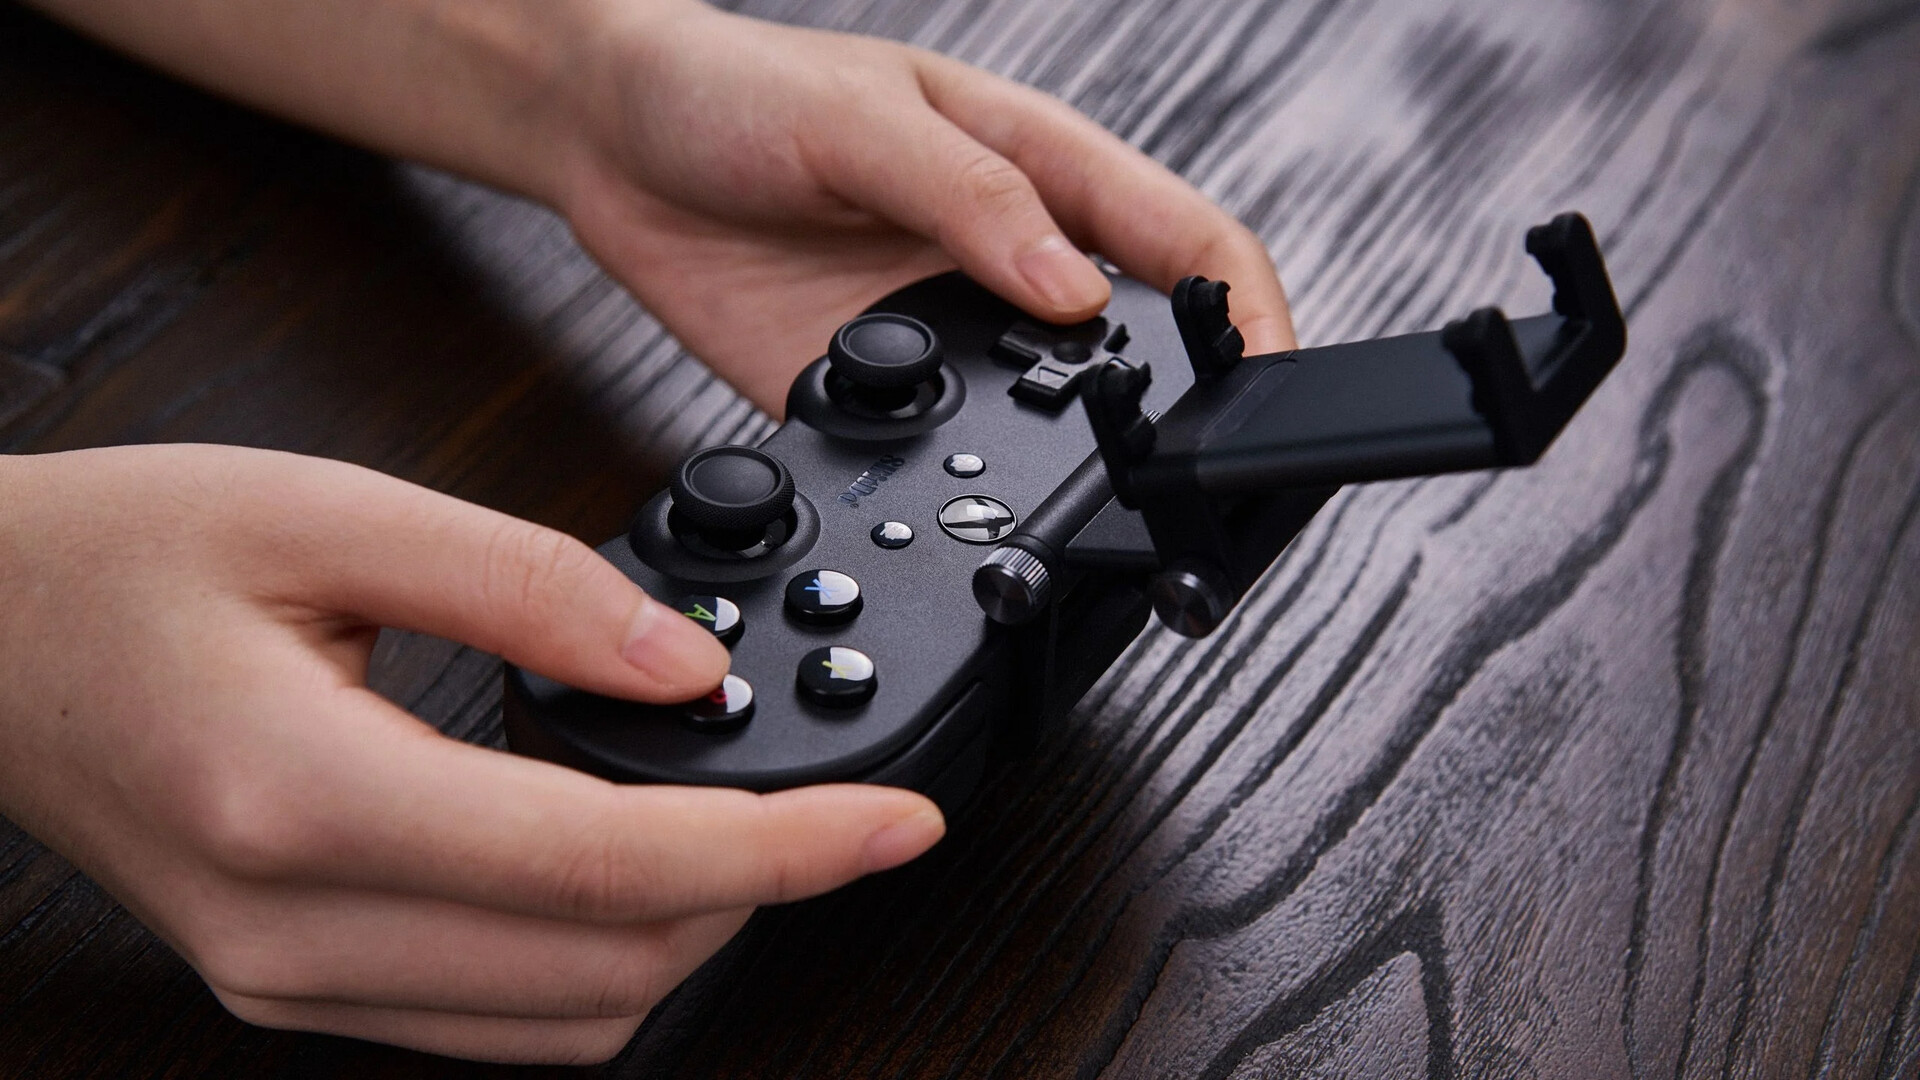 8bitdo Popular Retro Controller Company Releases Xbox Themed Sn30 Pro Controller And Gaming Clip For Microsoft Project Xcloud Notebookcheck Net News